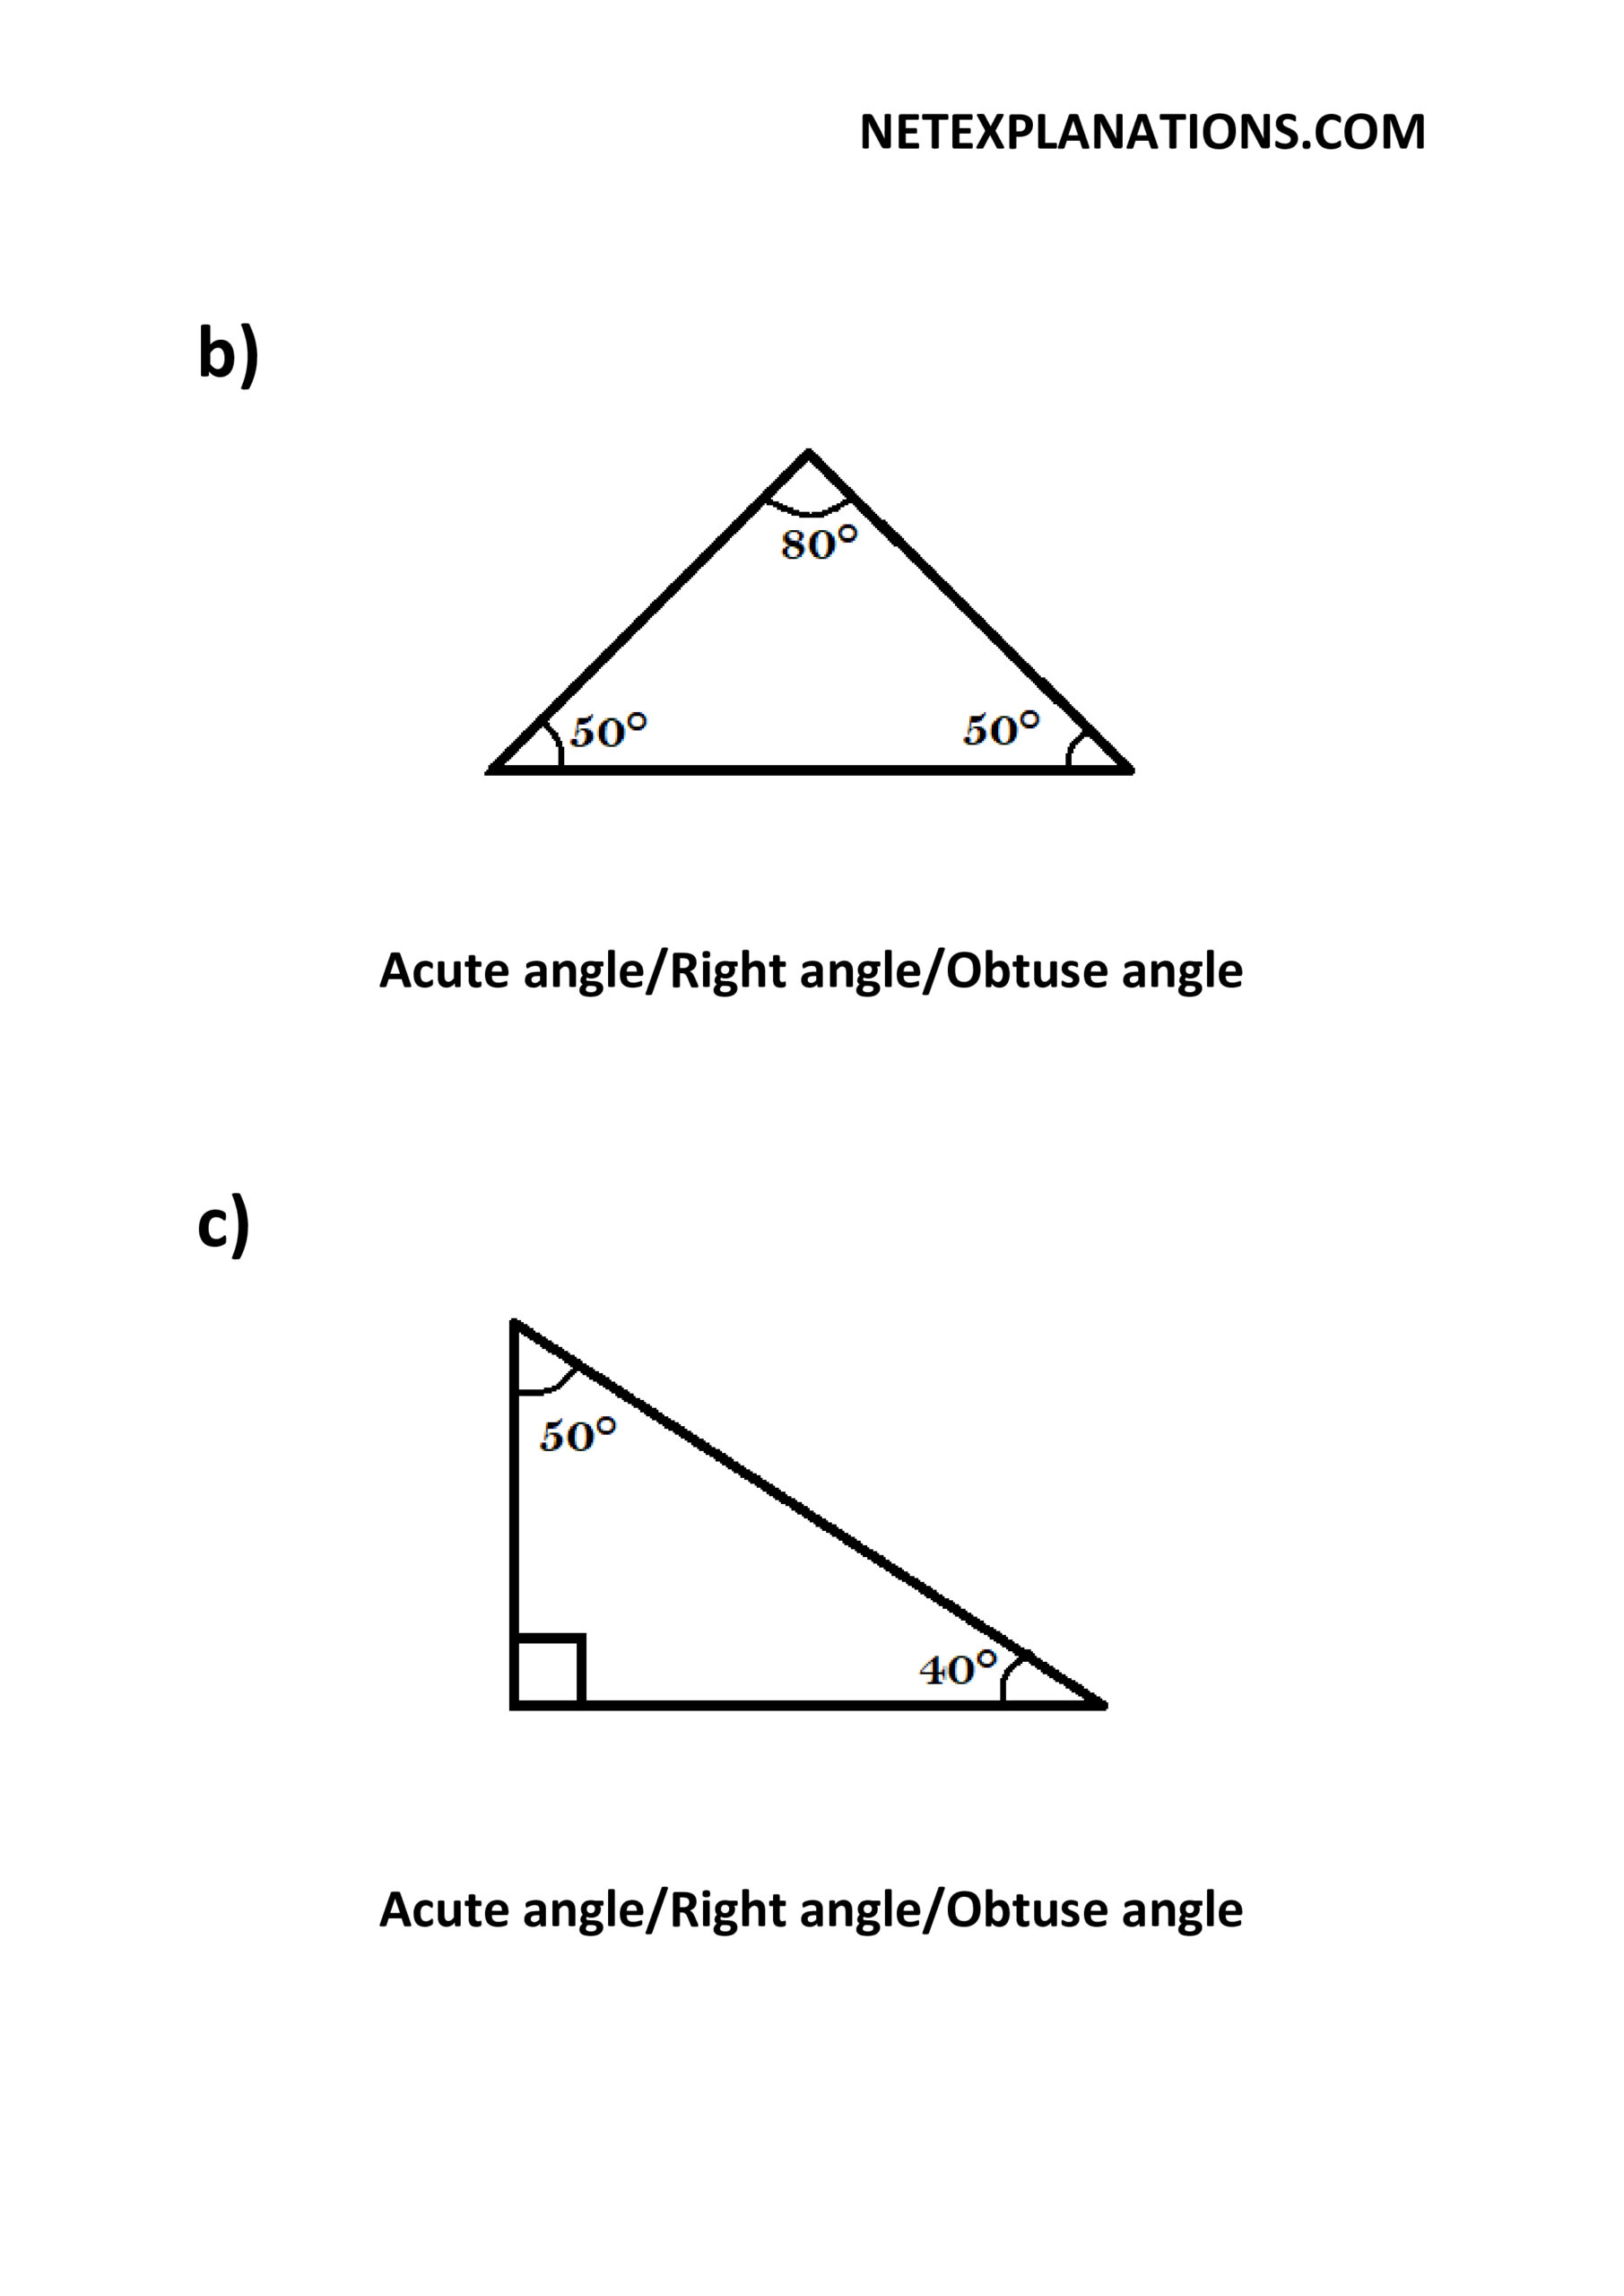 High quality triangle worksheets